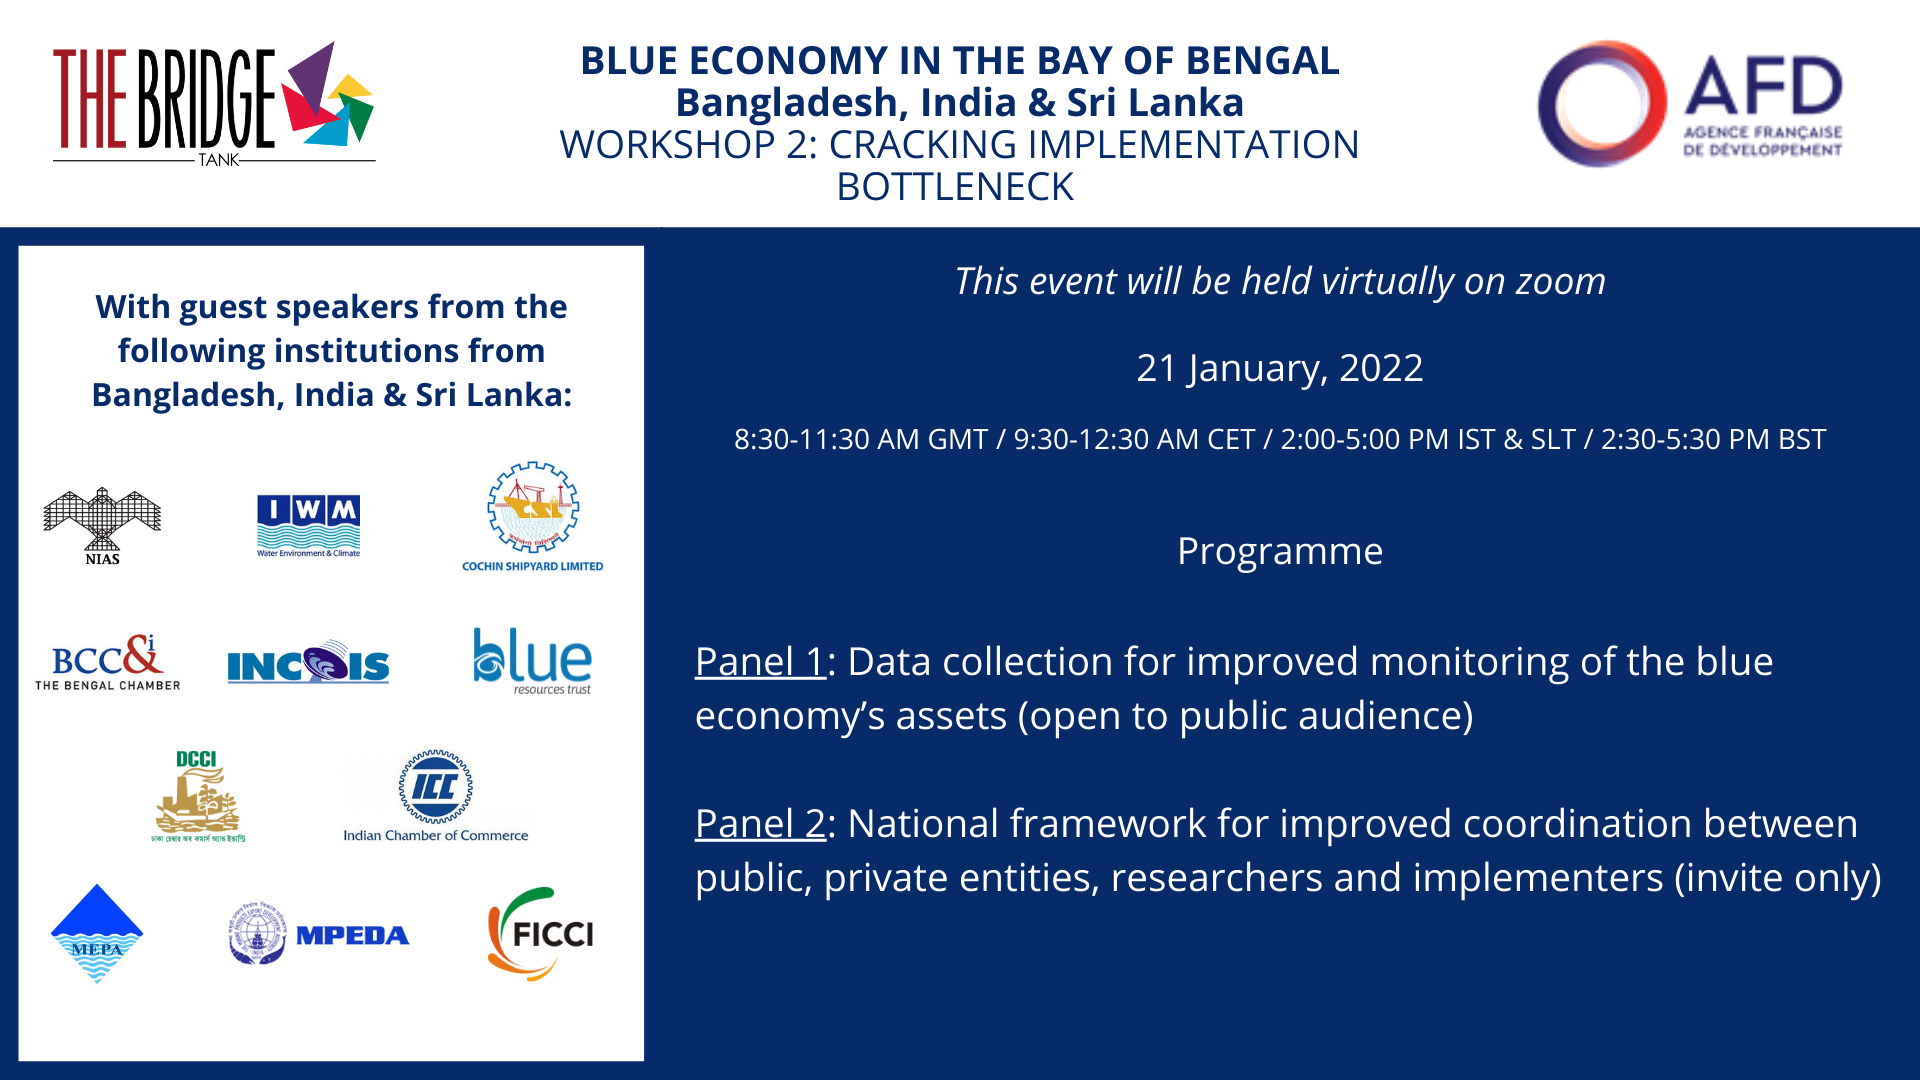 The Bridge Tank and French Development Agency launch their 2nd workshop on Blue economy: implementation issues